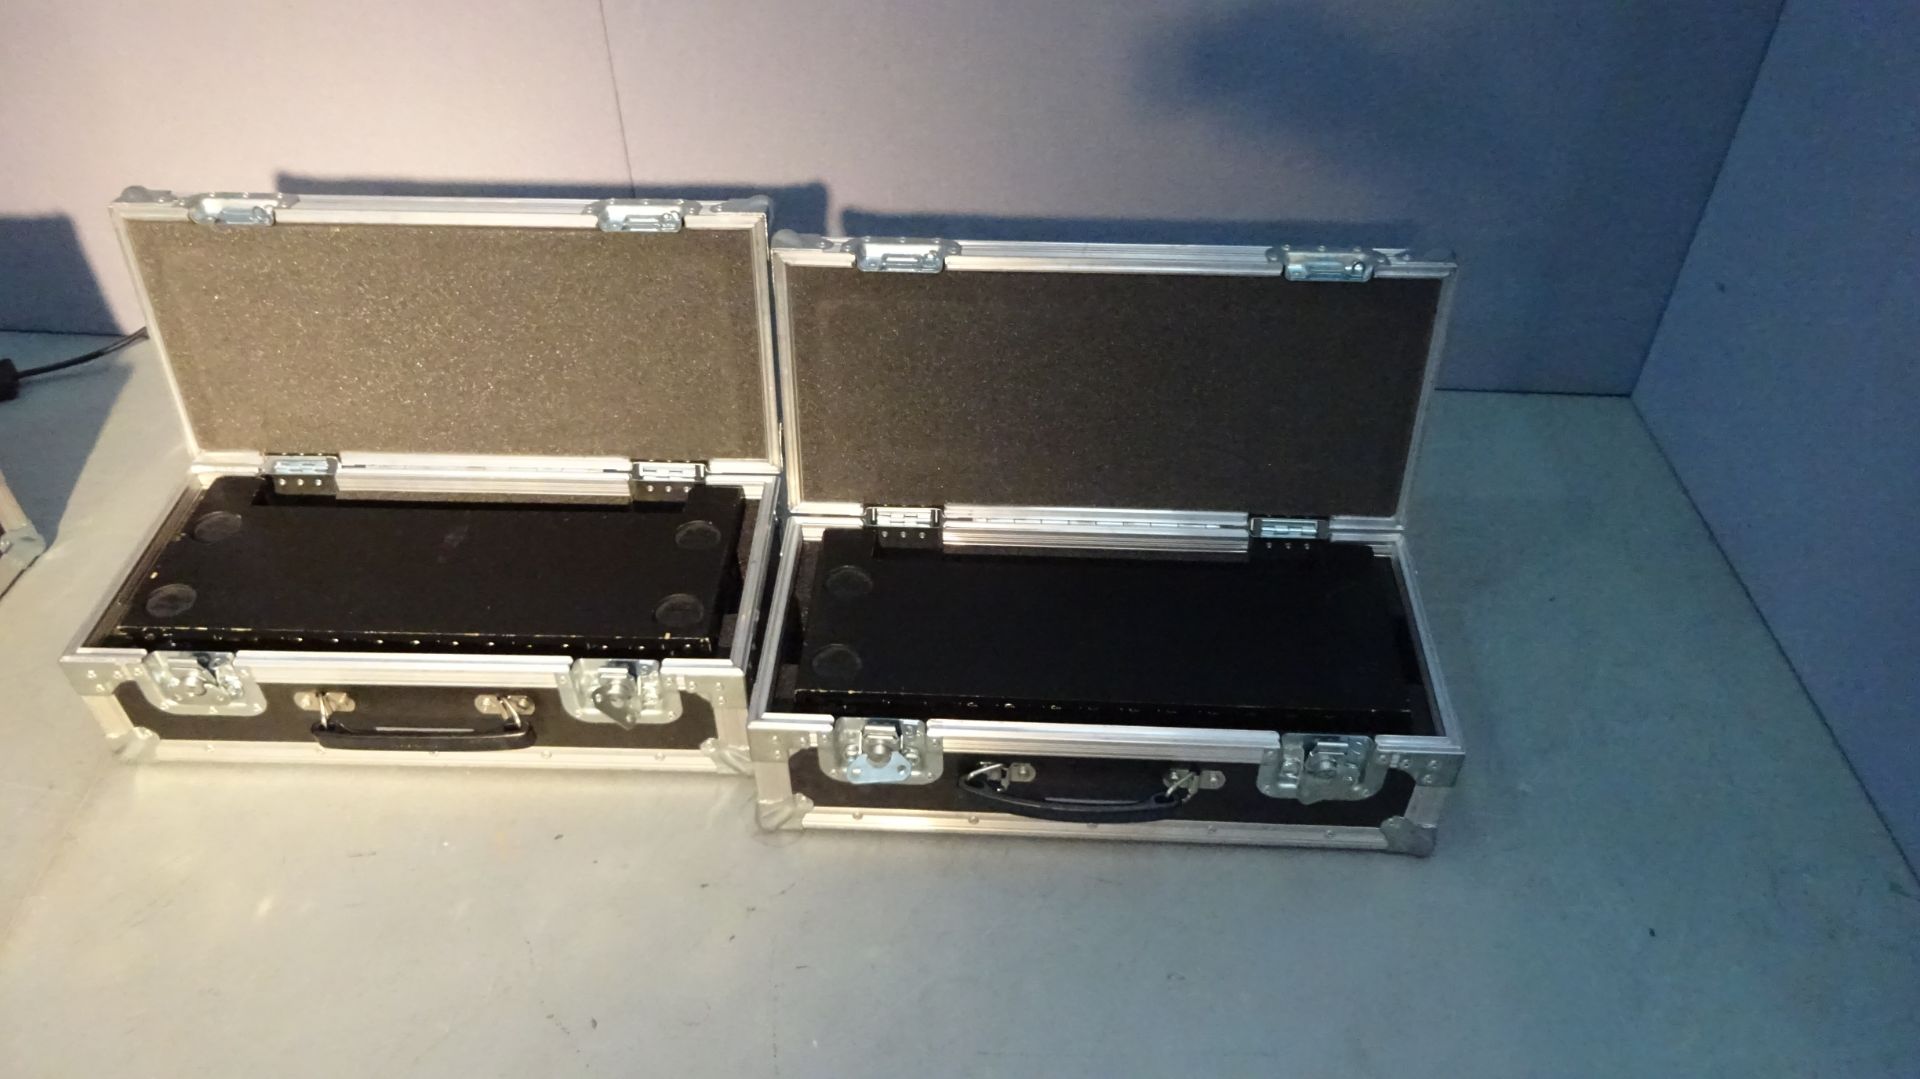 2 x Chauvet DMX Buffer Data Stream 4 1 in 4 out 3pin or 5pin c/w mains lead & Flight Case - Image 5 of 7